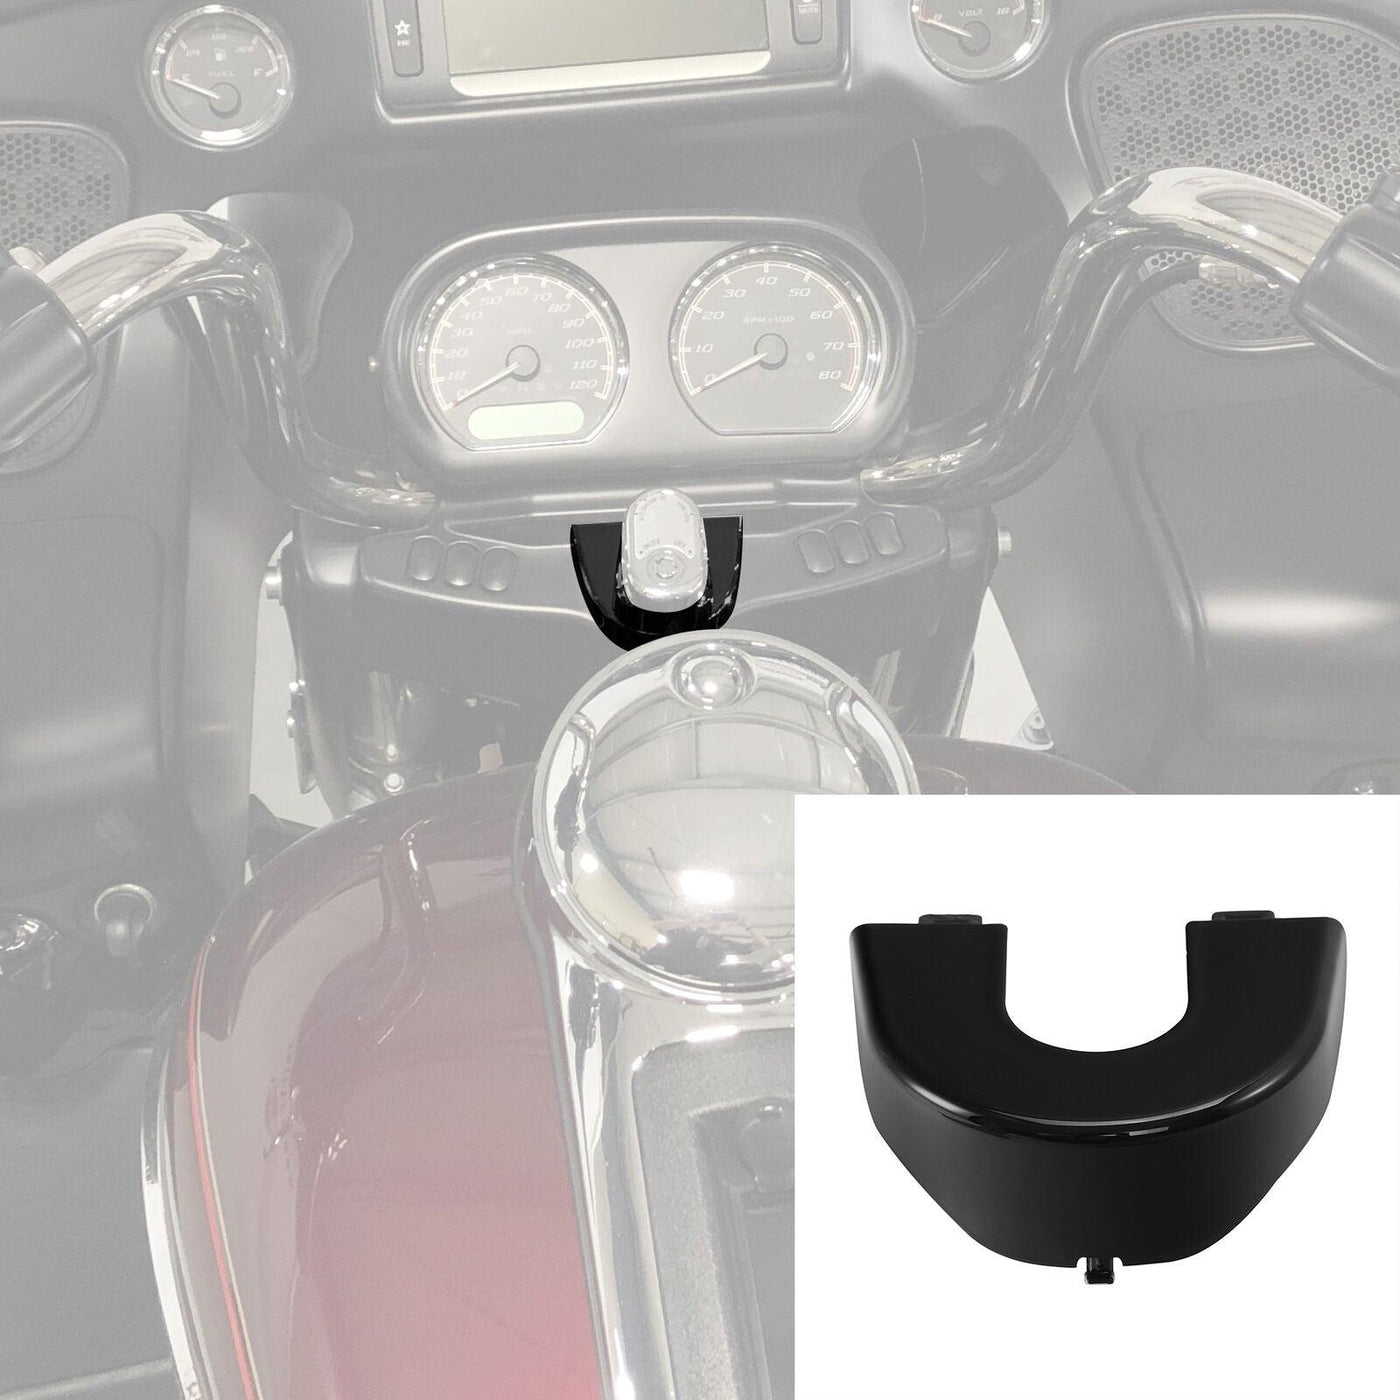 Ignition Switch Panel Trim Fit For Harley Road Glide FLTRX 2015-2021 Vivid Black - Moto Life Products